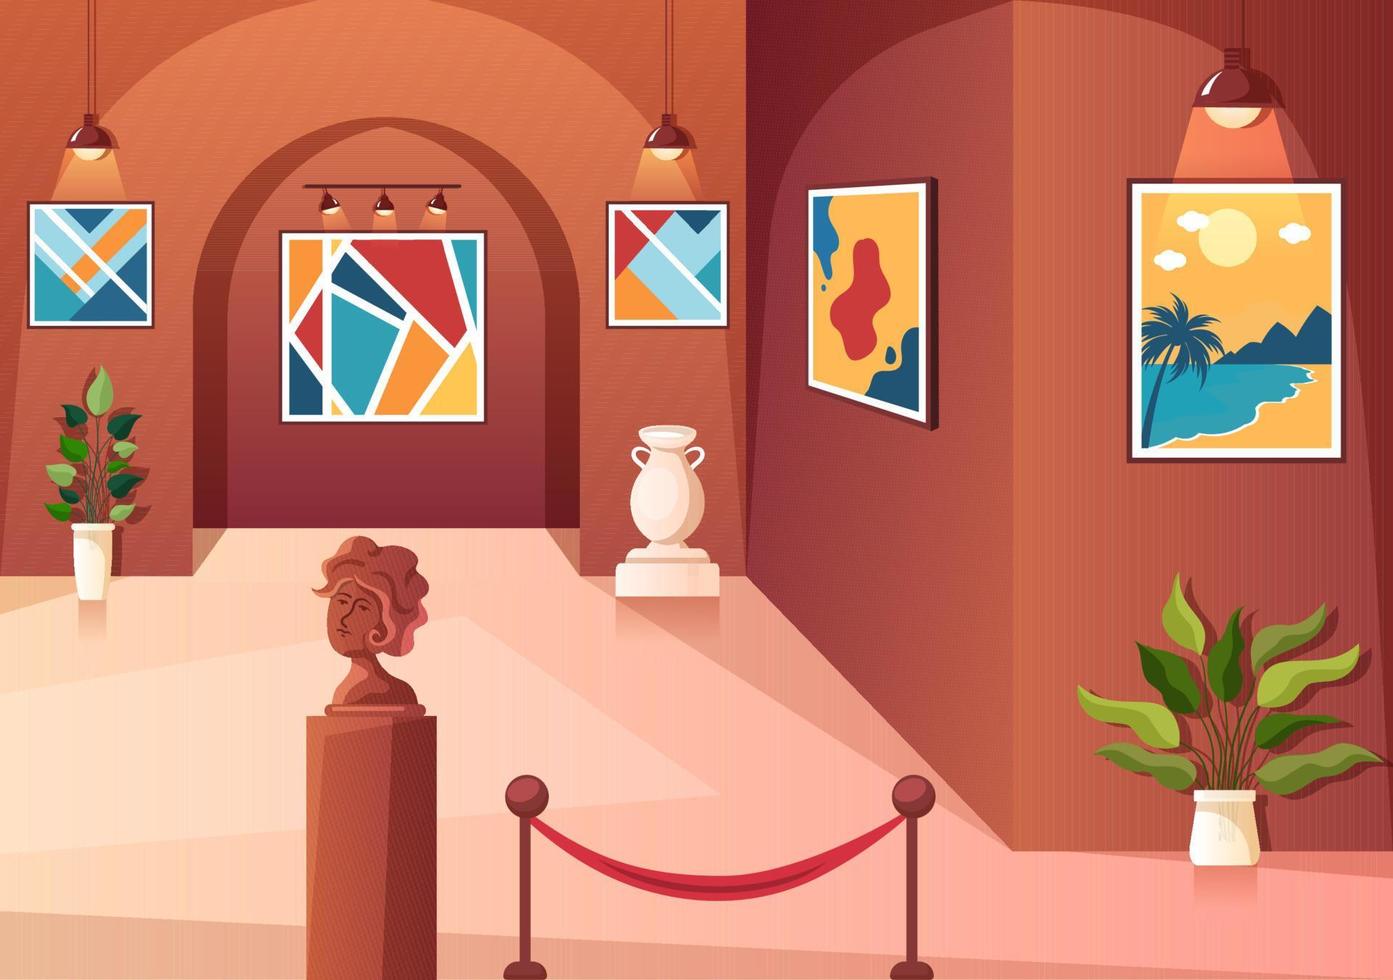 Art Gallery Museum Interior Cartoon Illustration Exhibition, Culture, Sculpture and Painting for Some People to See it in Flat Style Design vector